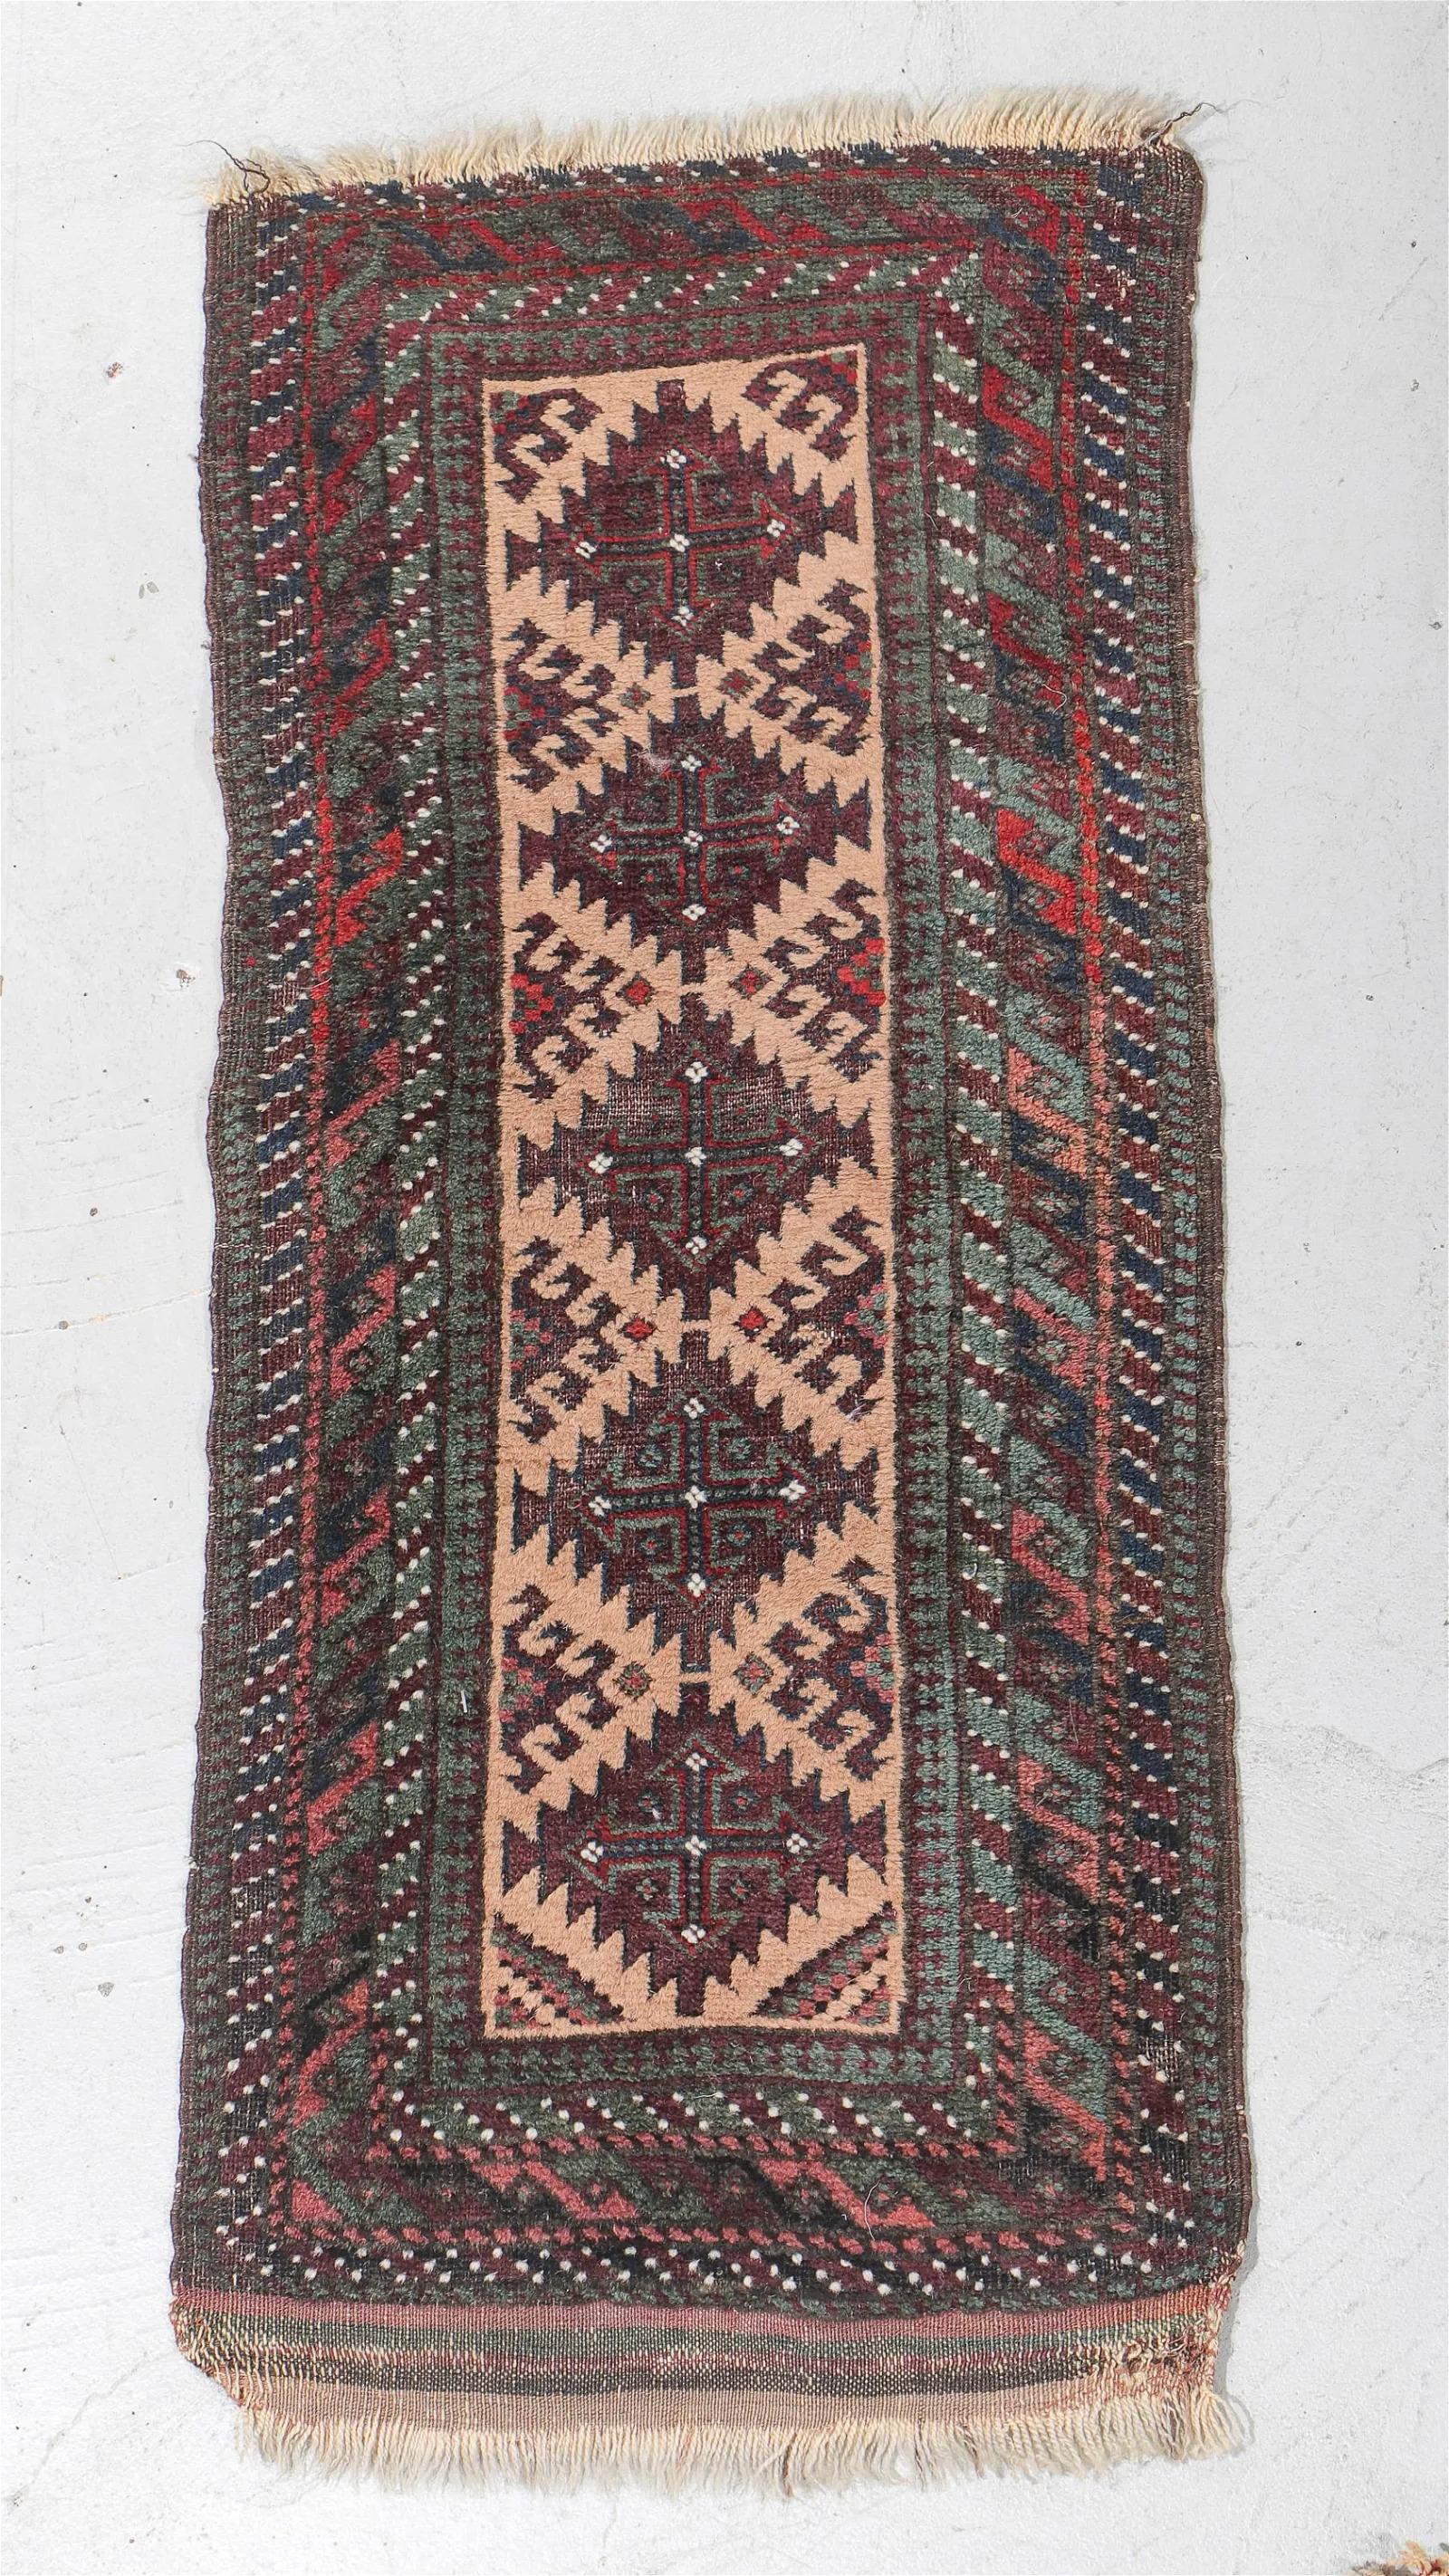 Lot of 9 Antique Afghan Baluch Collectible Rugs 1.6' x 3.2', 1870s - 2B29 For Sale 4